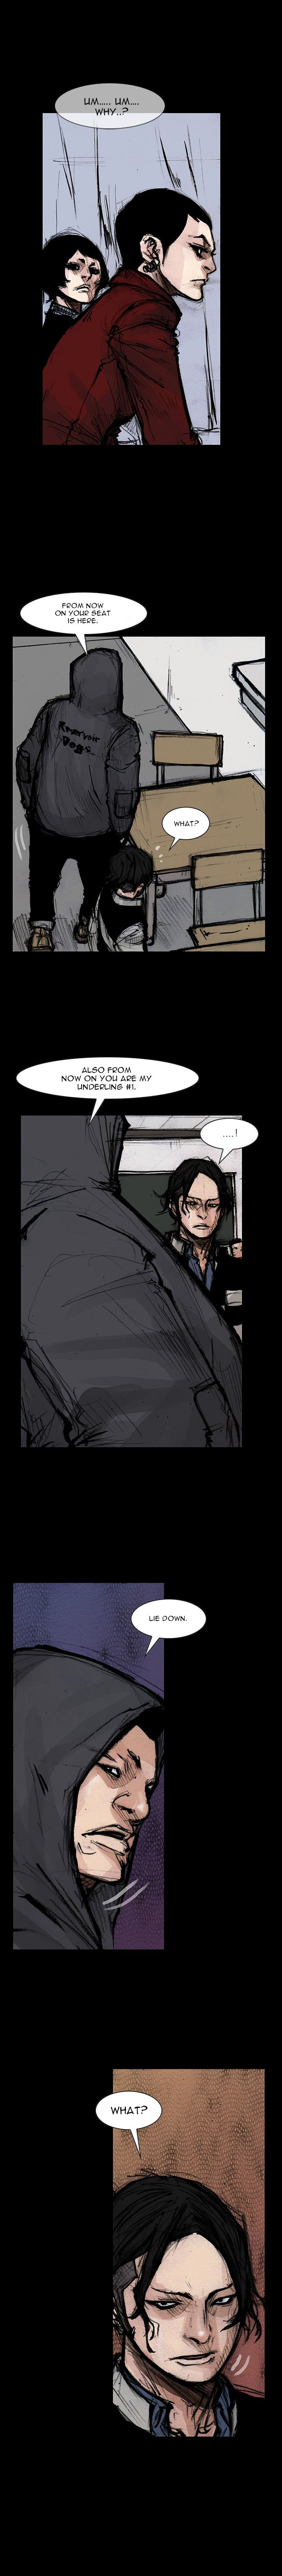 Dokgo 2 Chapter 10 Page 15